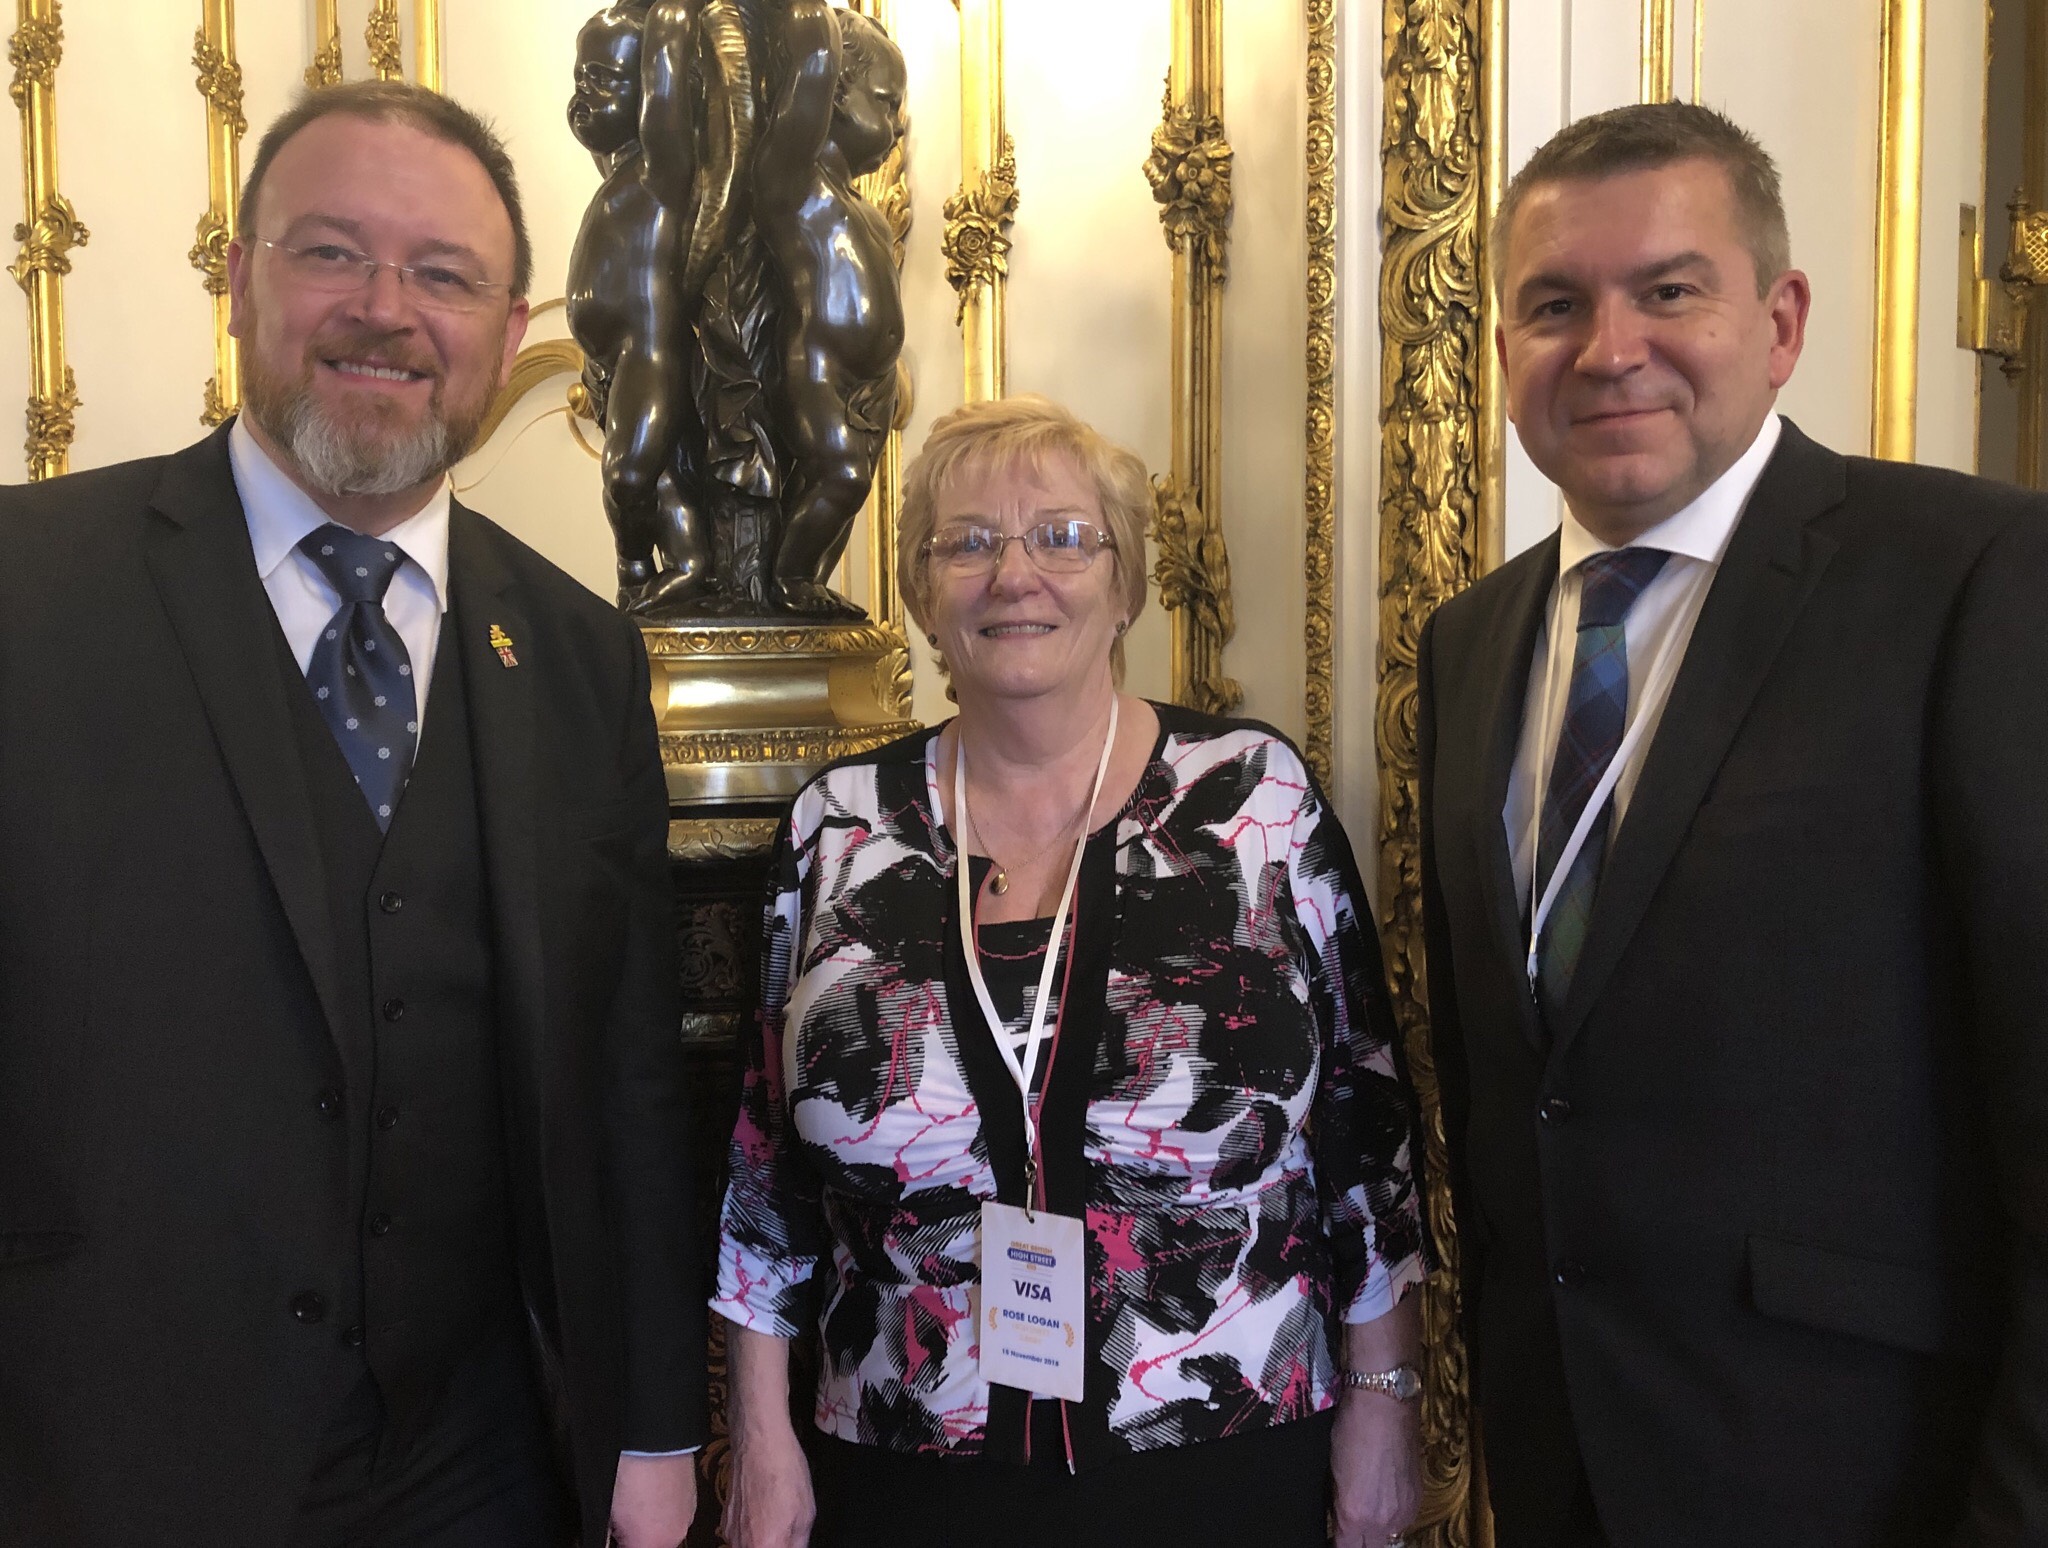 MP David Duguid at Lancaster House last week along with Rose Logan and Robert Stephen, both of Turriff Business Association.